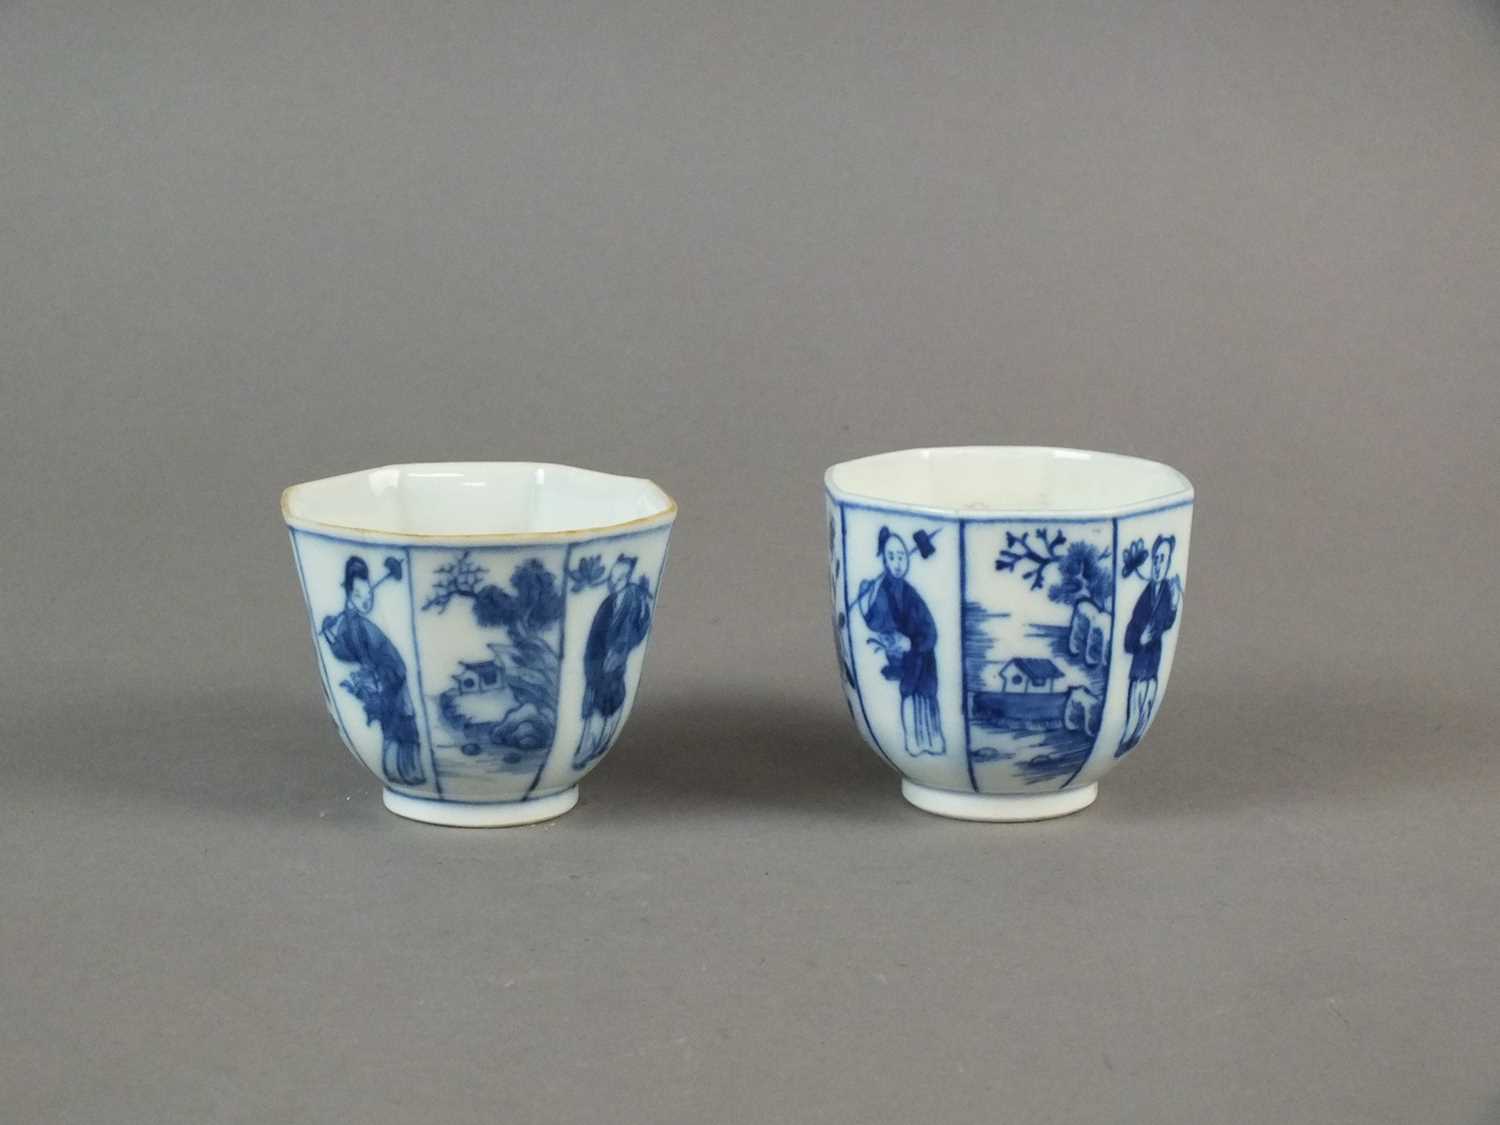 Caughley coffee cup and Chinese prototype - Image 5 of 5